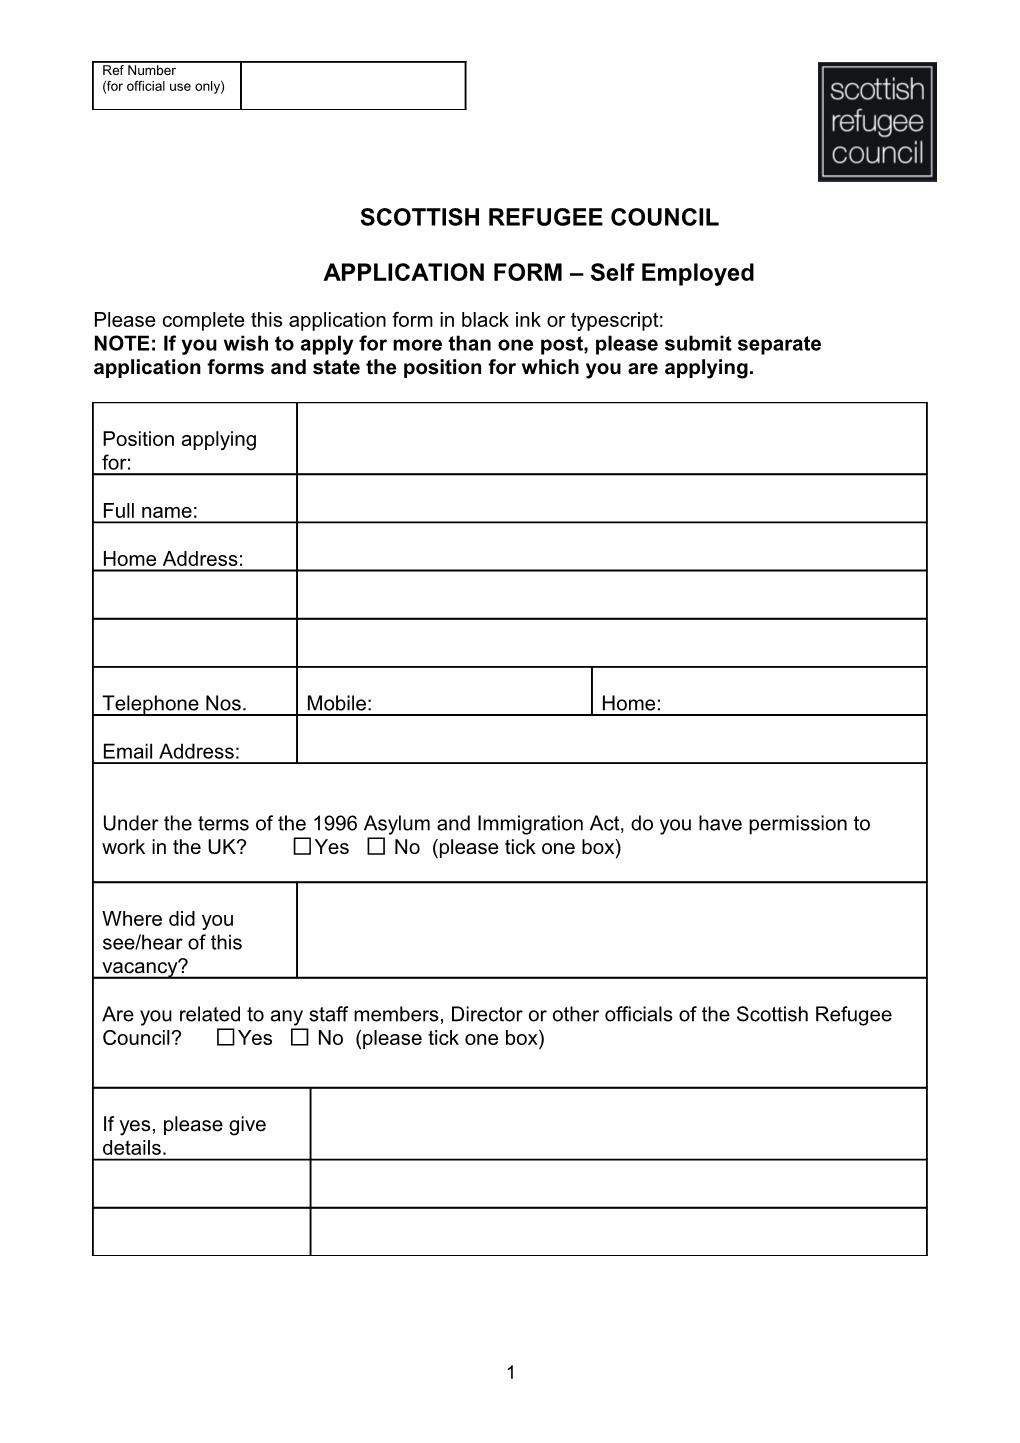 APPLICATION FORM Self Employed